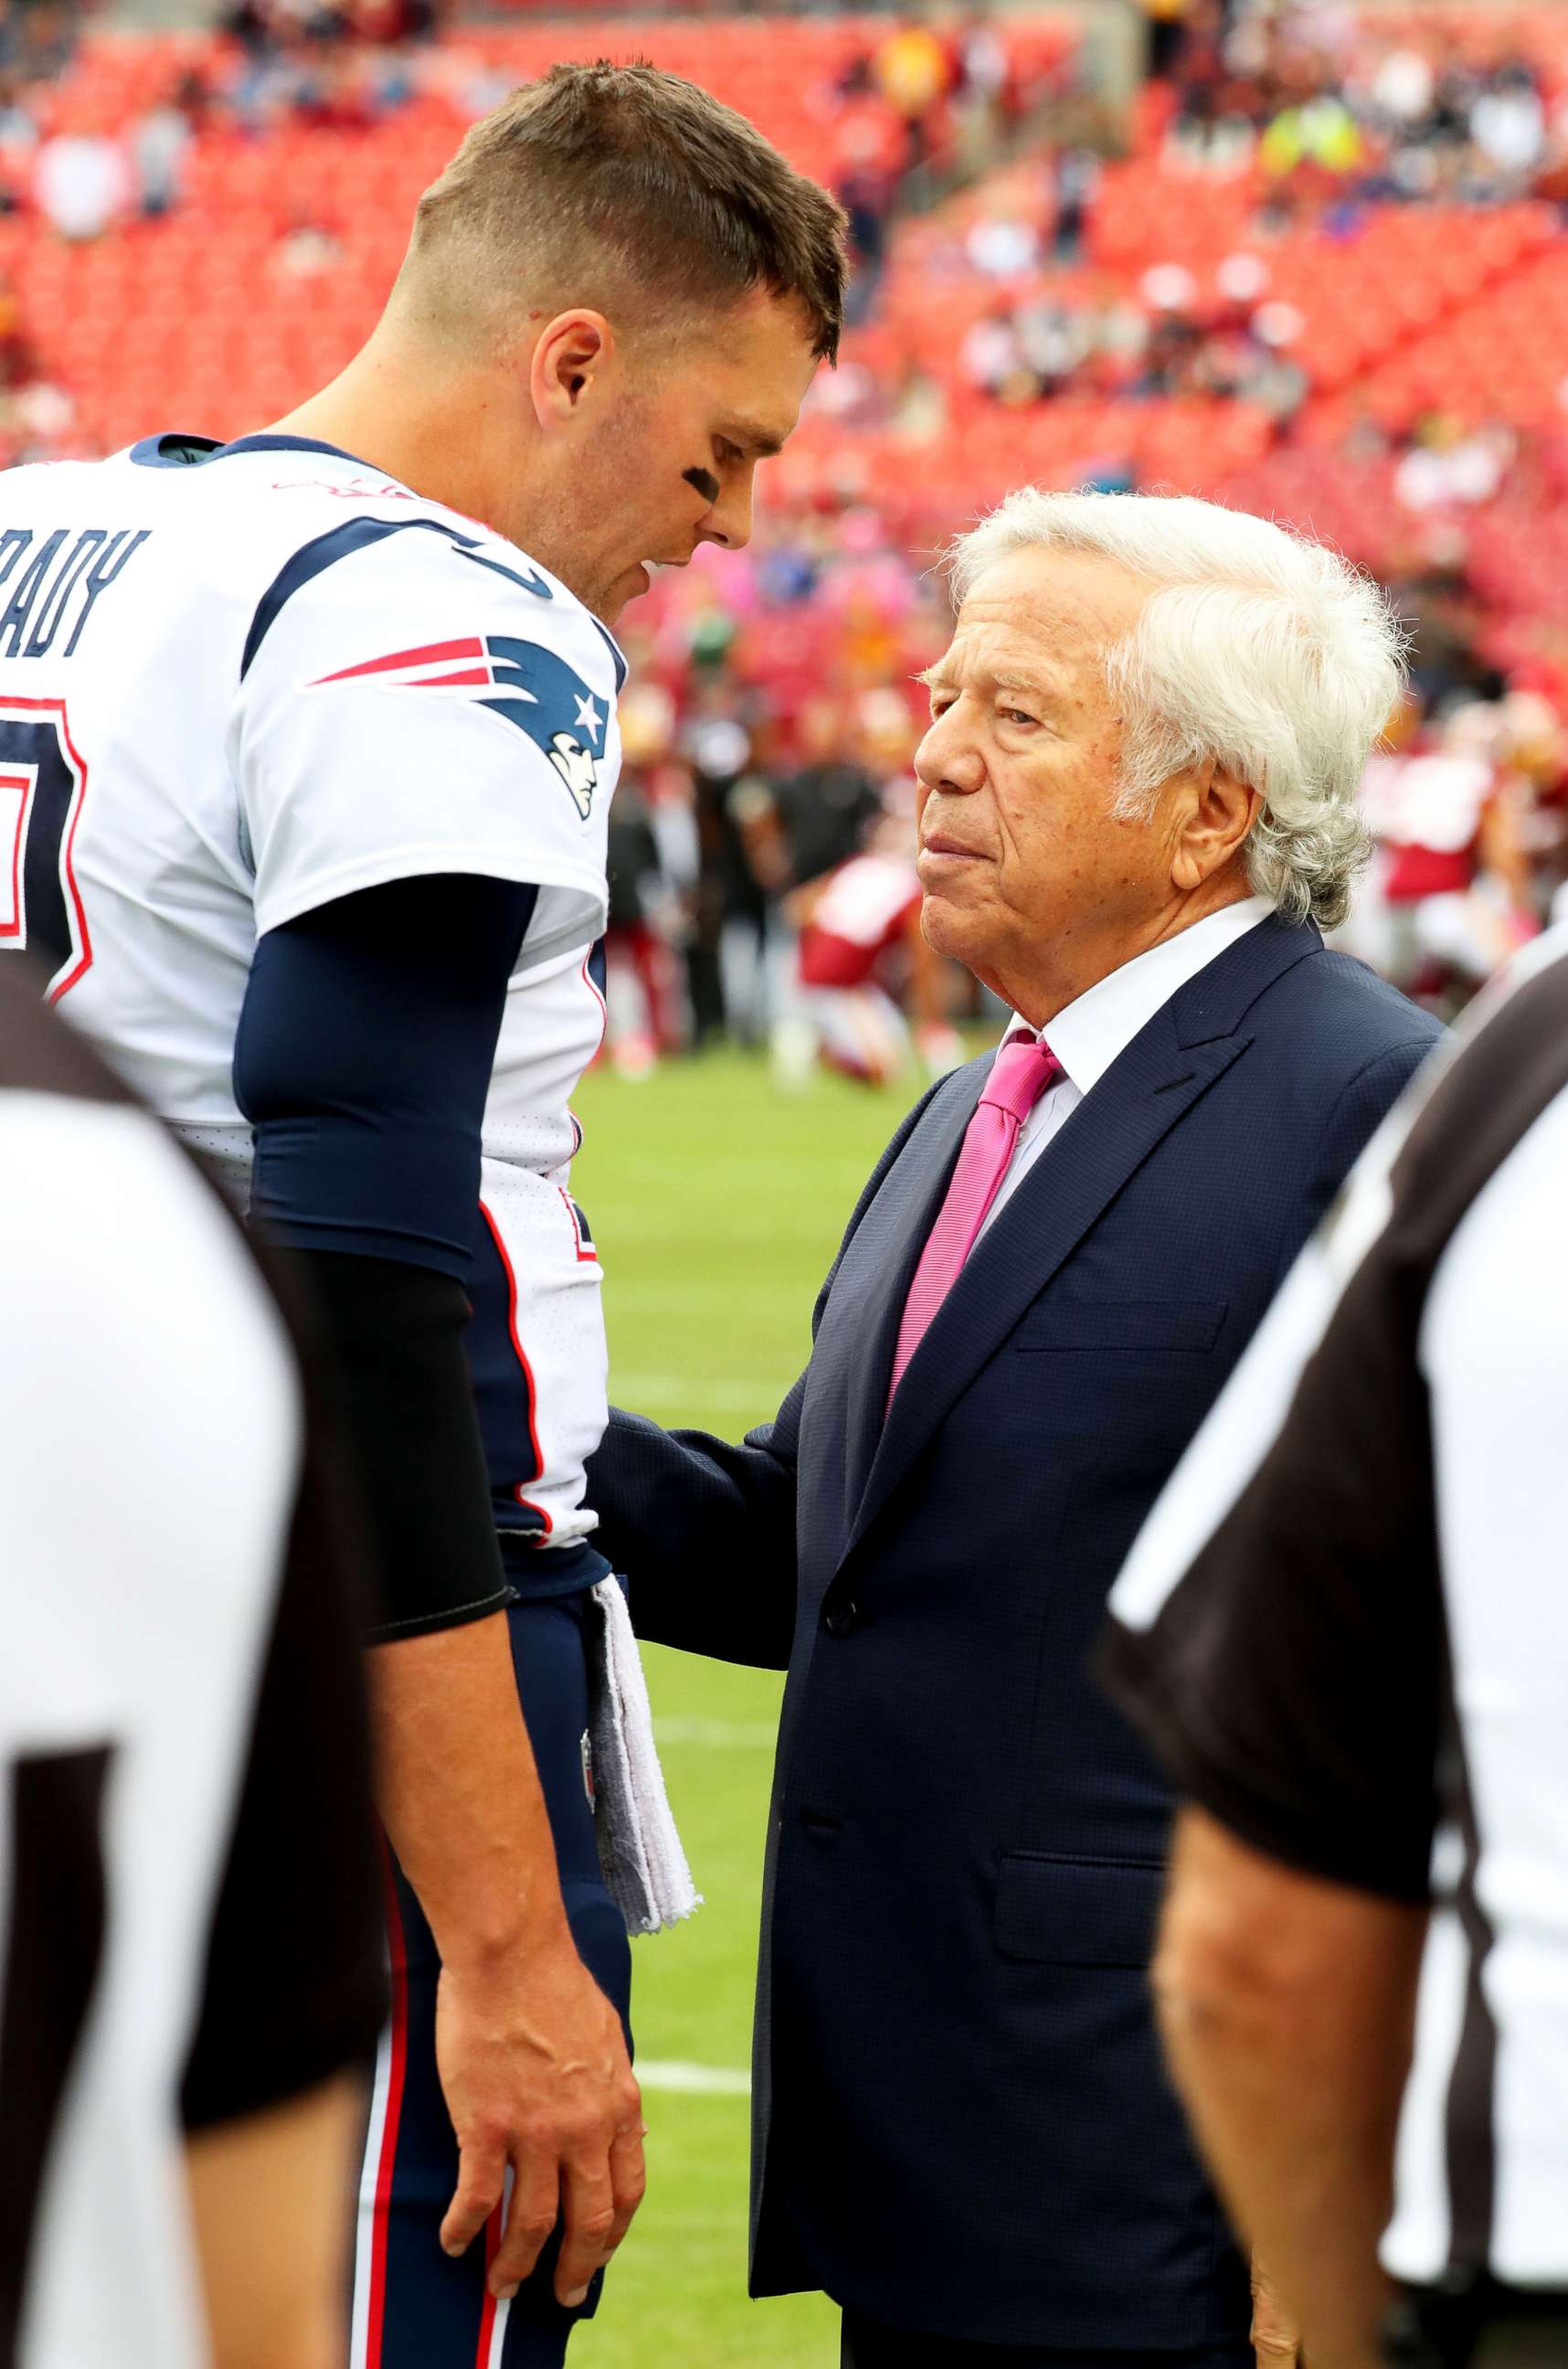 PHOTO: New England Patriots quarterback Tom Brady and Patriots owner Robert Kraft speak before an NFL game against the Washington Redskins at FedEx Field in Landover, Md., on Oct 6, 2019.